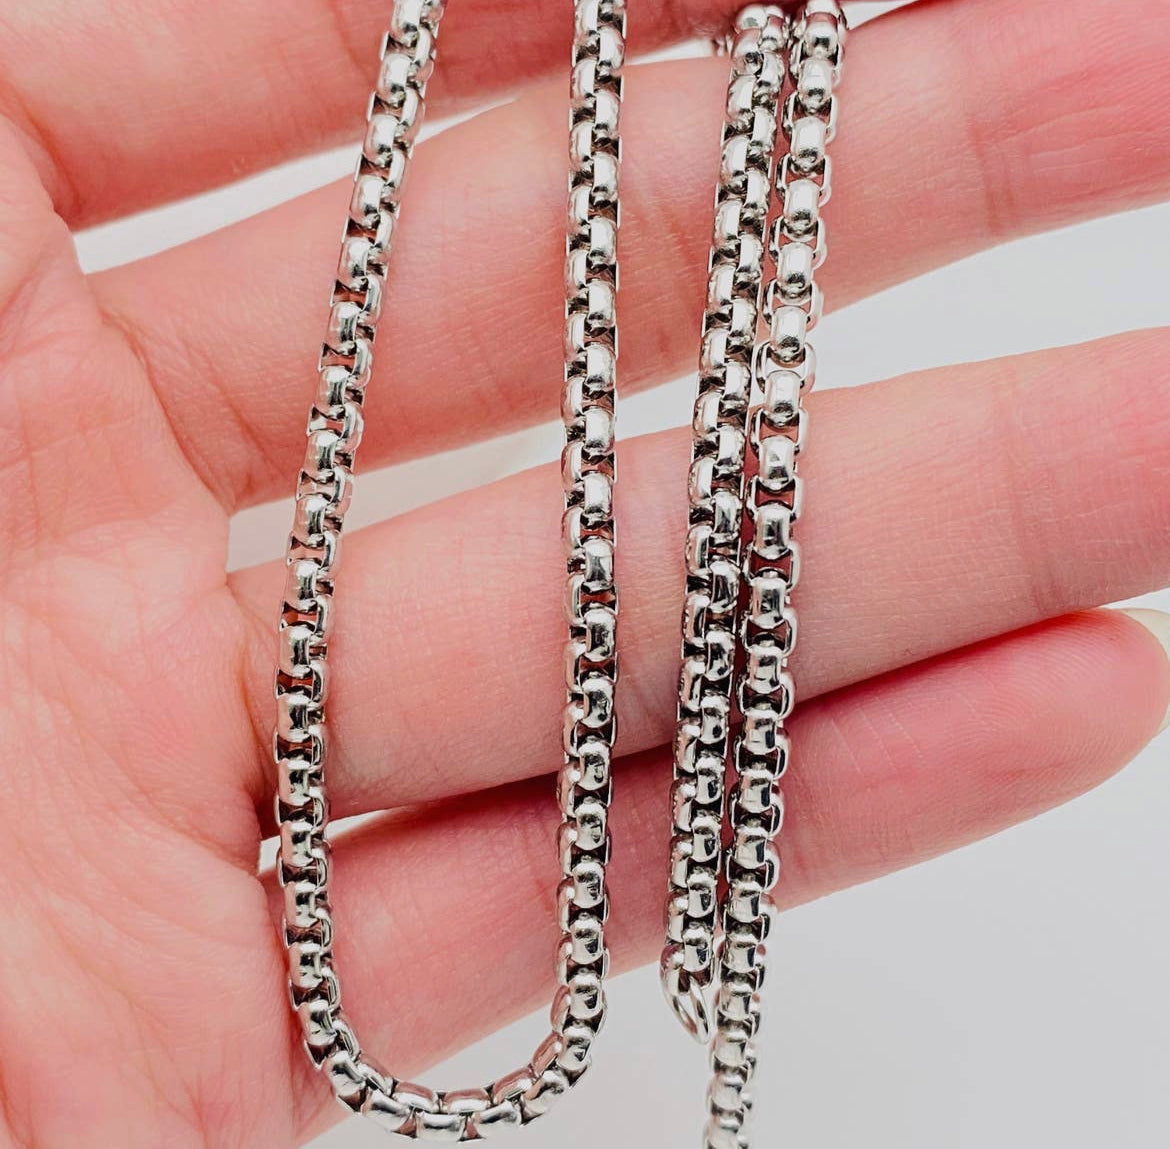 2.5 MM Thick Stainless Steel Square Chain 50 CM to 65 CM in length